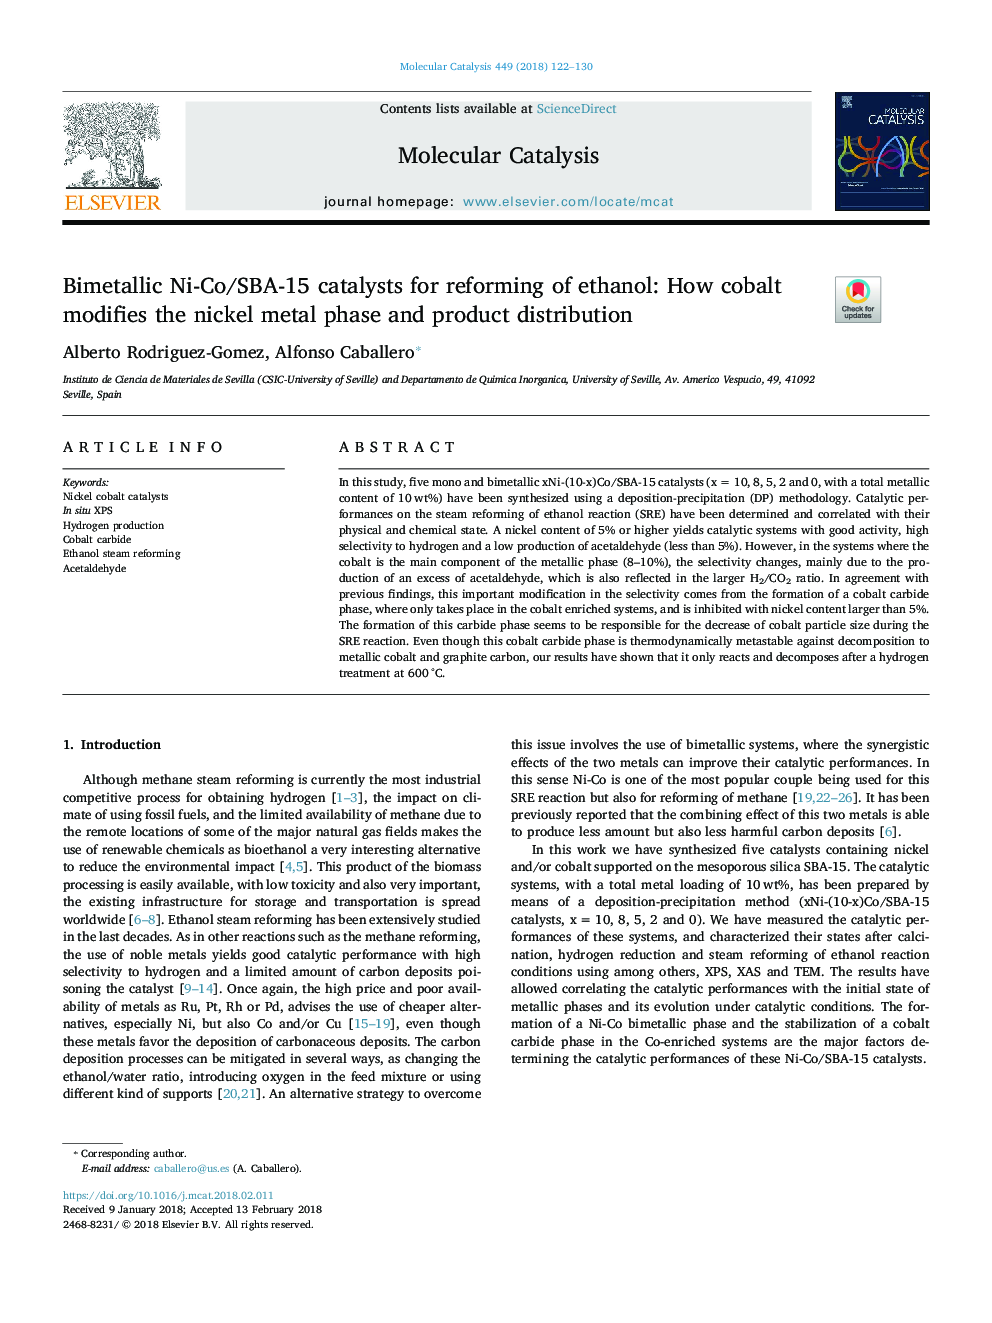 Bimetallic Ni-Co/SBA-15 catalysts for reforming of ethanol: How cobalt modifies the nickel metal phase and product distribution